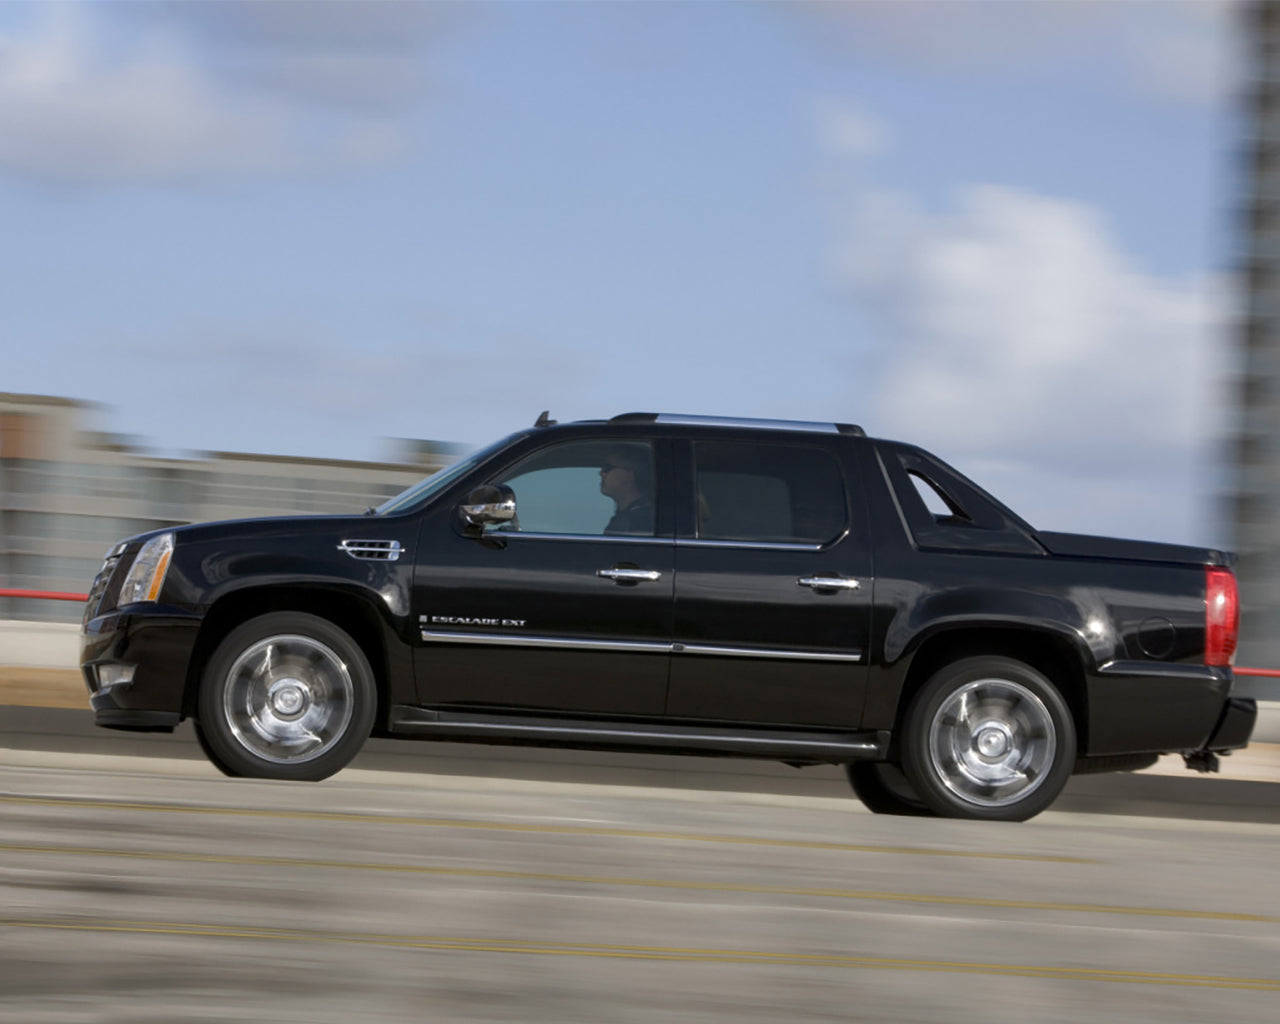 Black Cadillac Escalade EXT Truck driving fast on the freeway